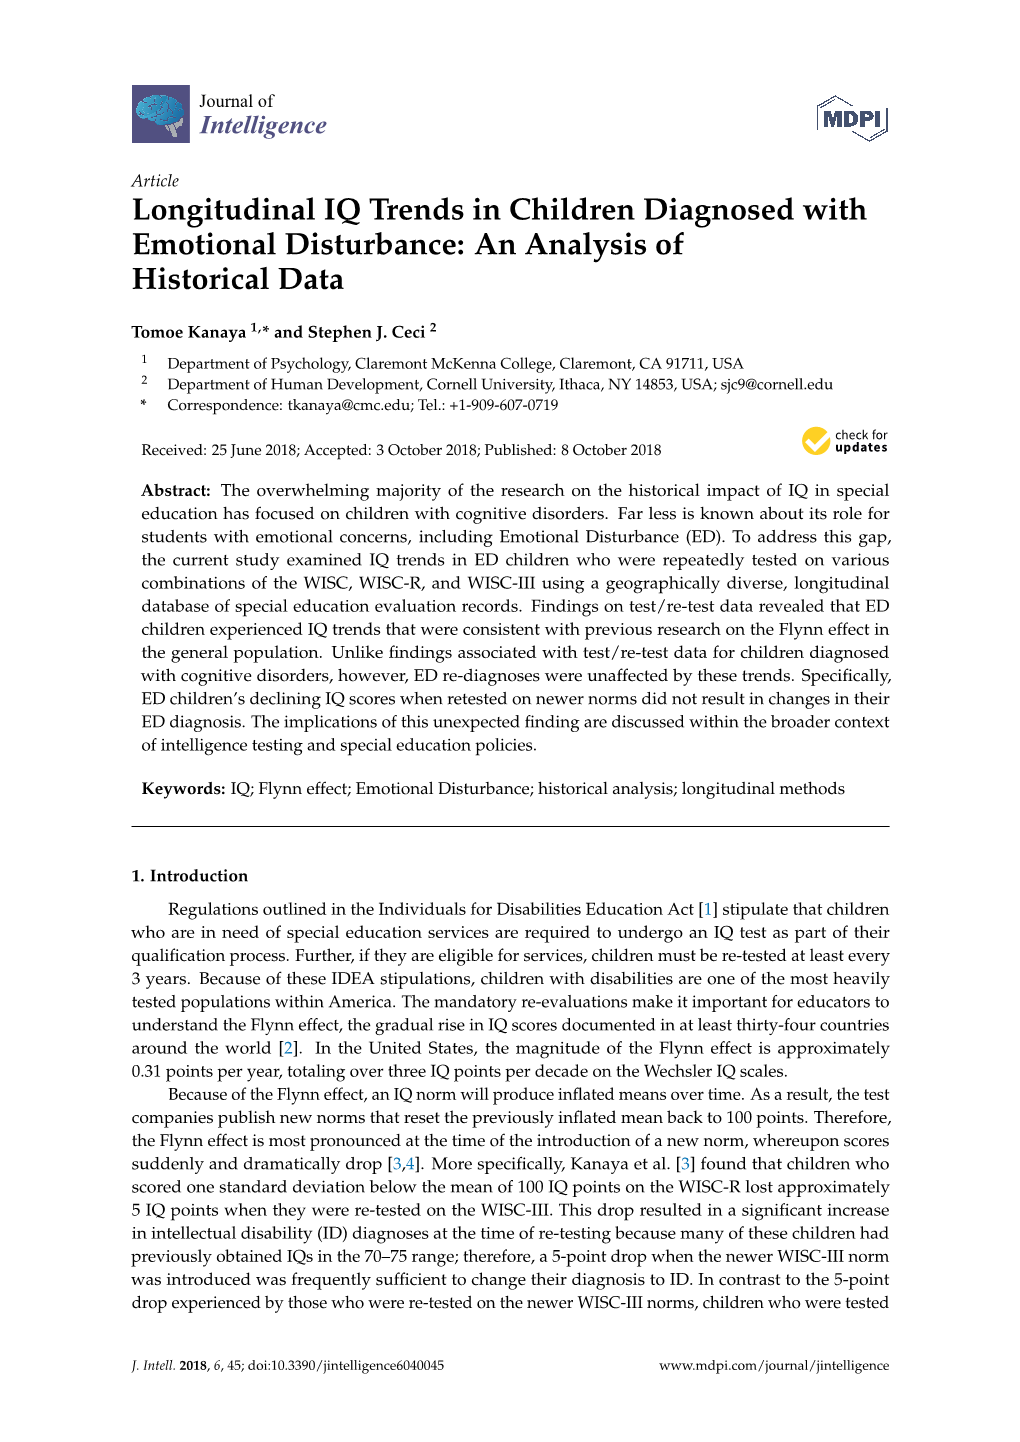 Longitudinal IQ Trends in Children Diagnosed with Emotional Disturbance: an Analysis of Historical Data